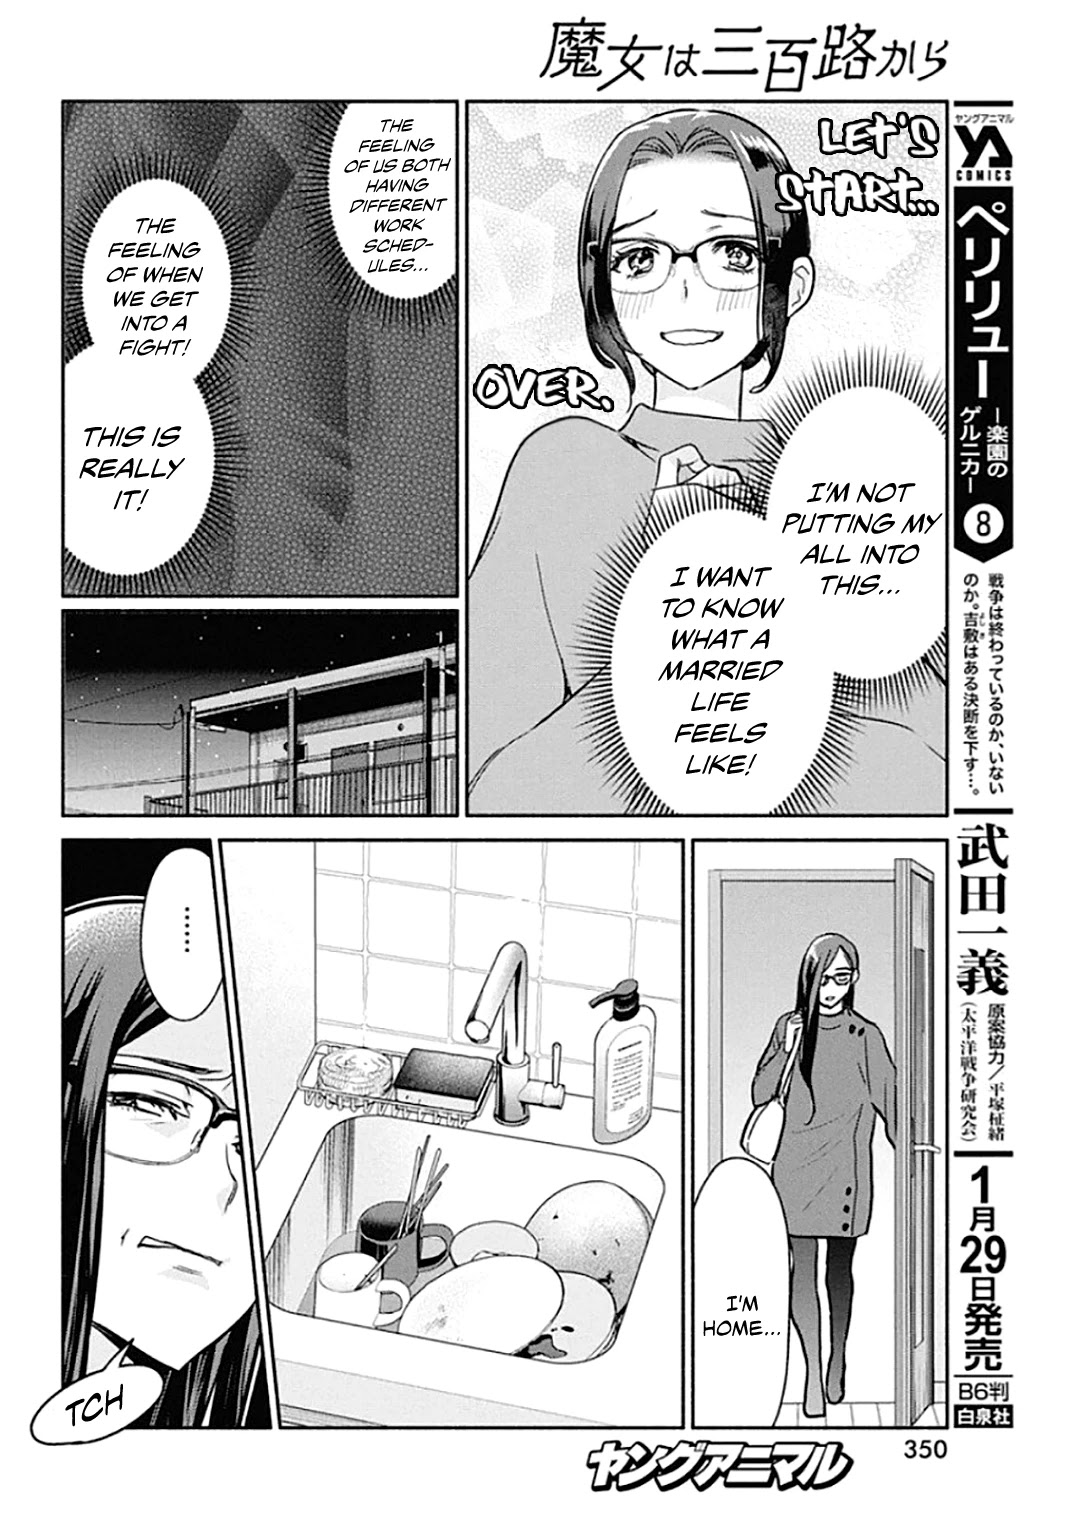 The Life Of The Witch Who Remains Single For About 300 Years! Chapter 43 #15